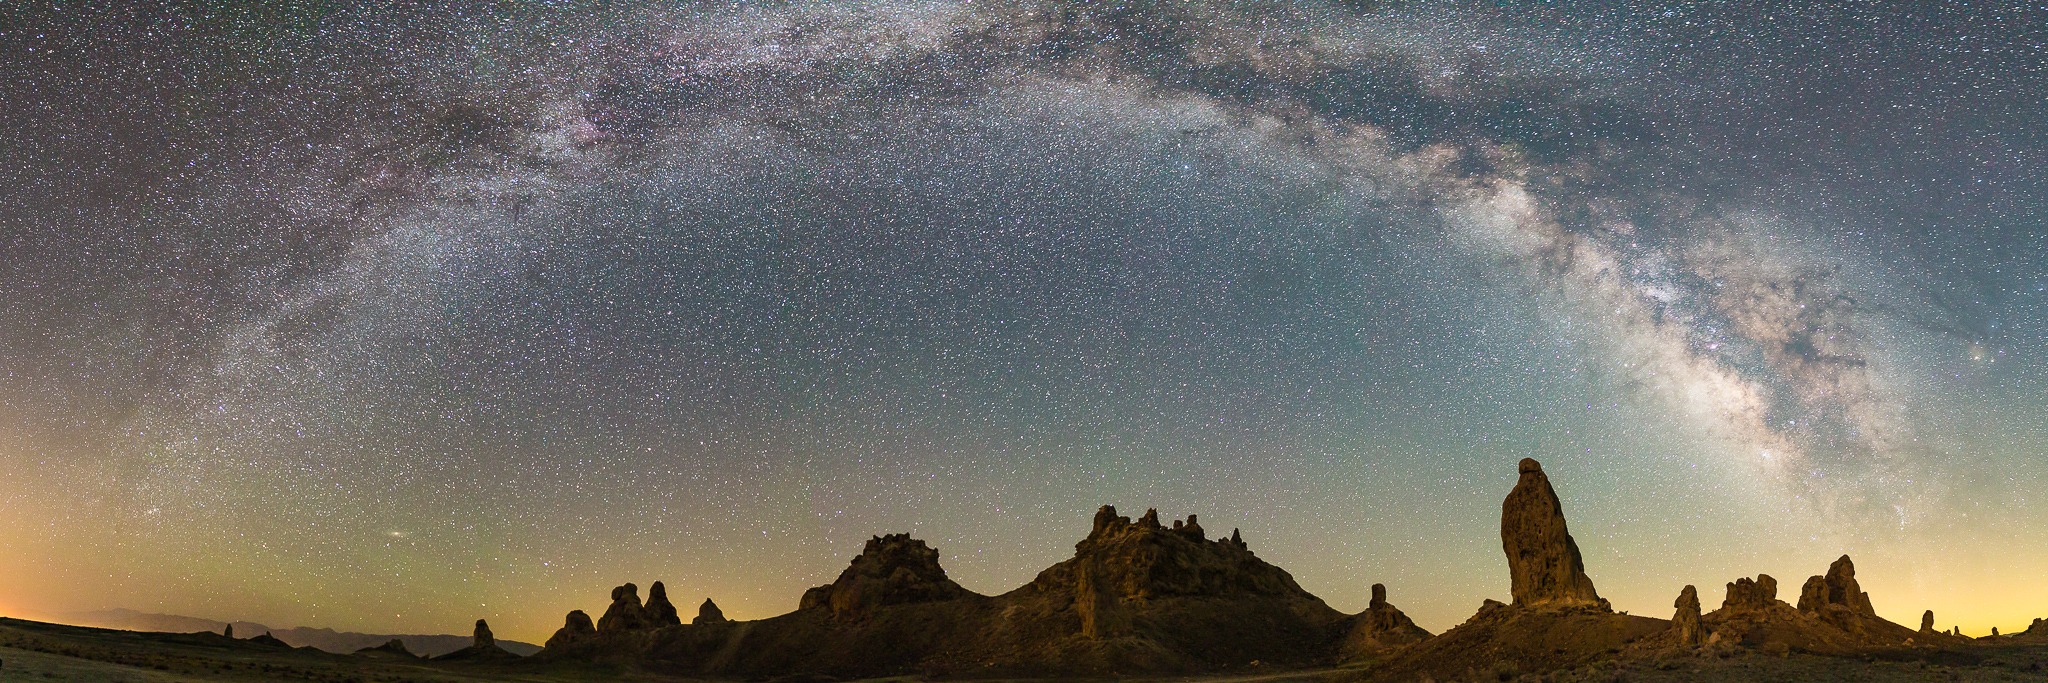 photographing milky way pano